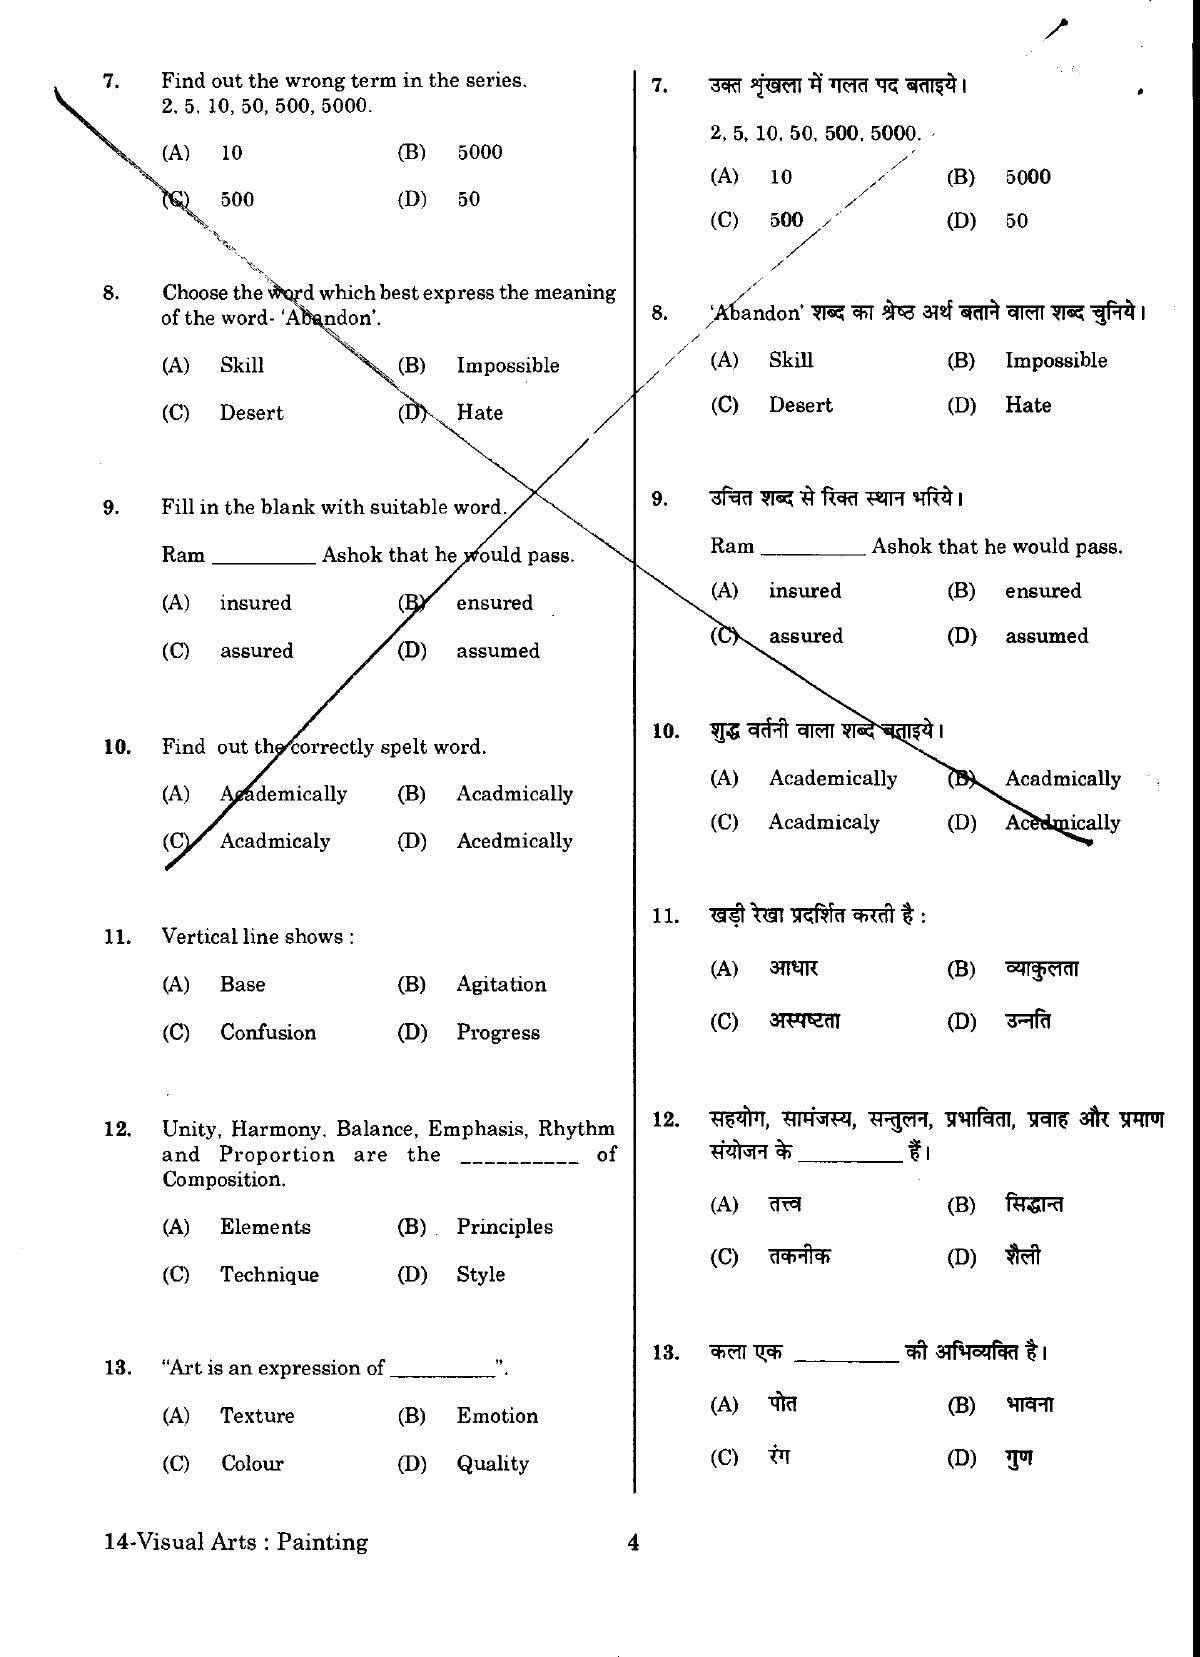 URATPG Visual Arts Painting Sample Question Paper 2018 - Page 3